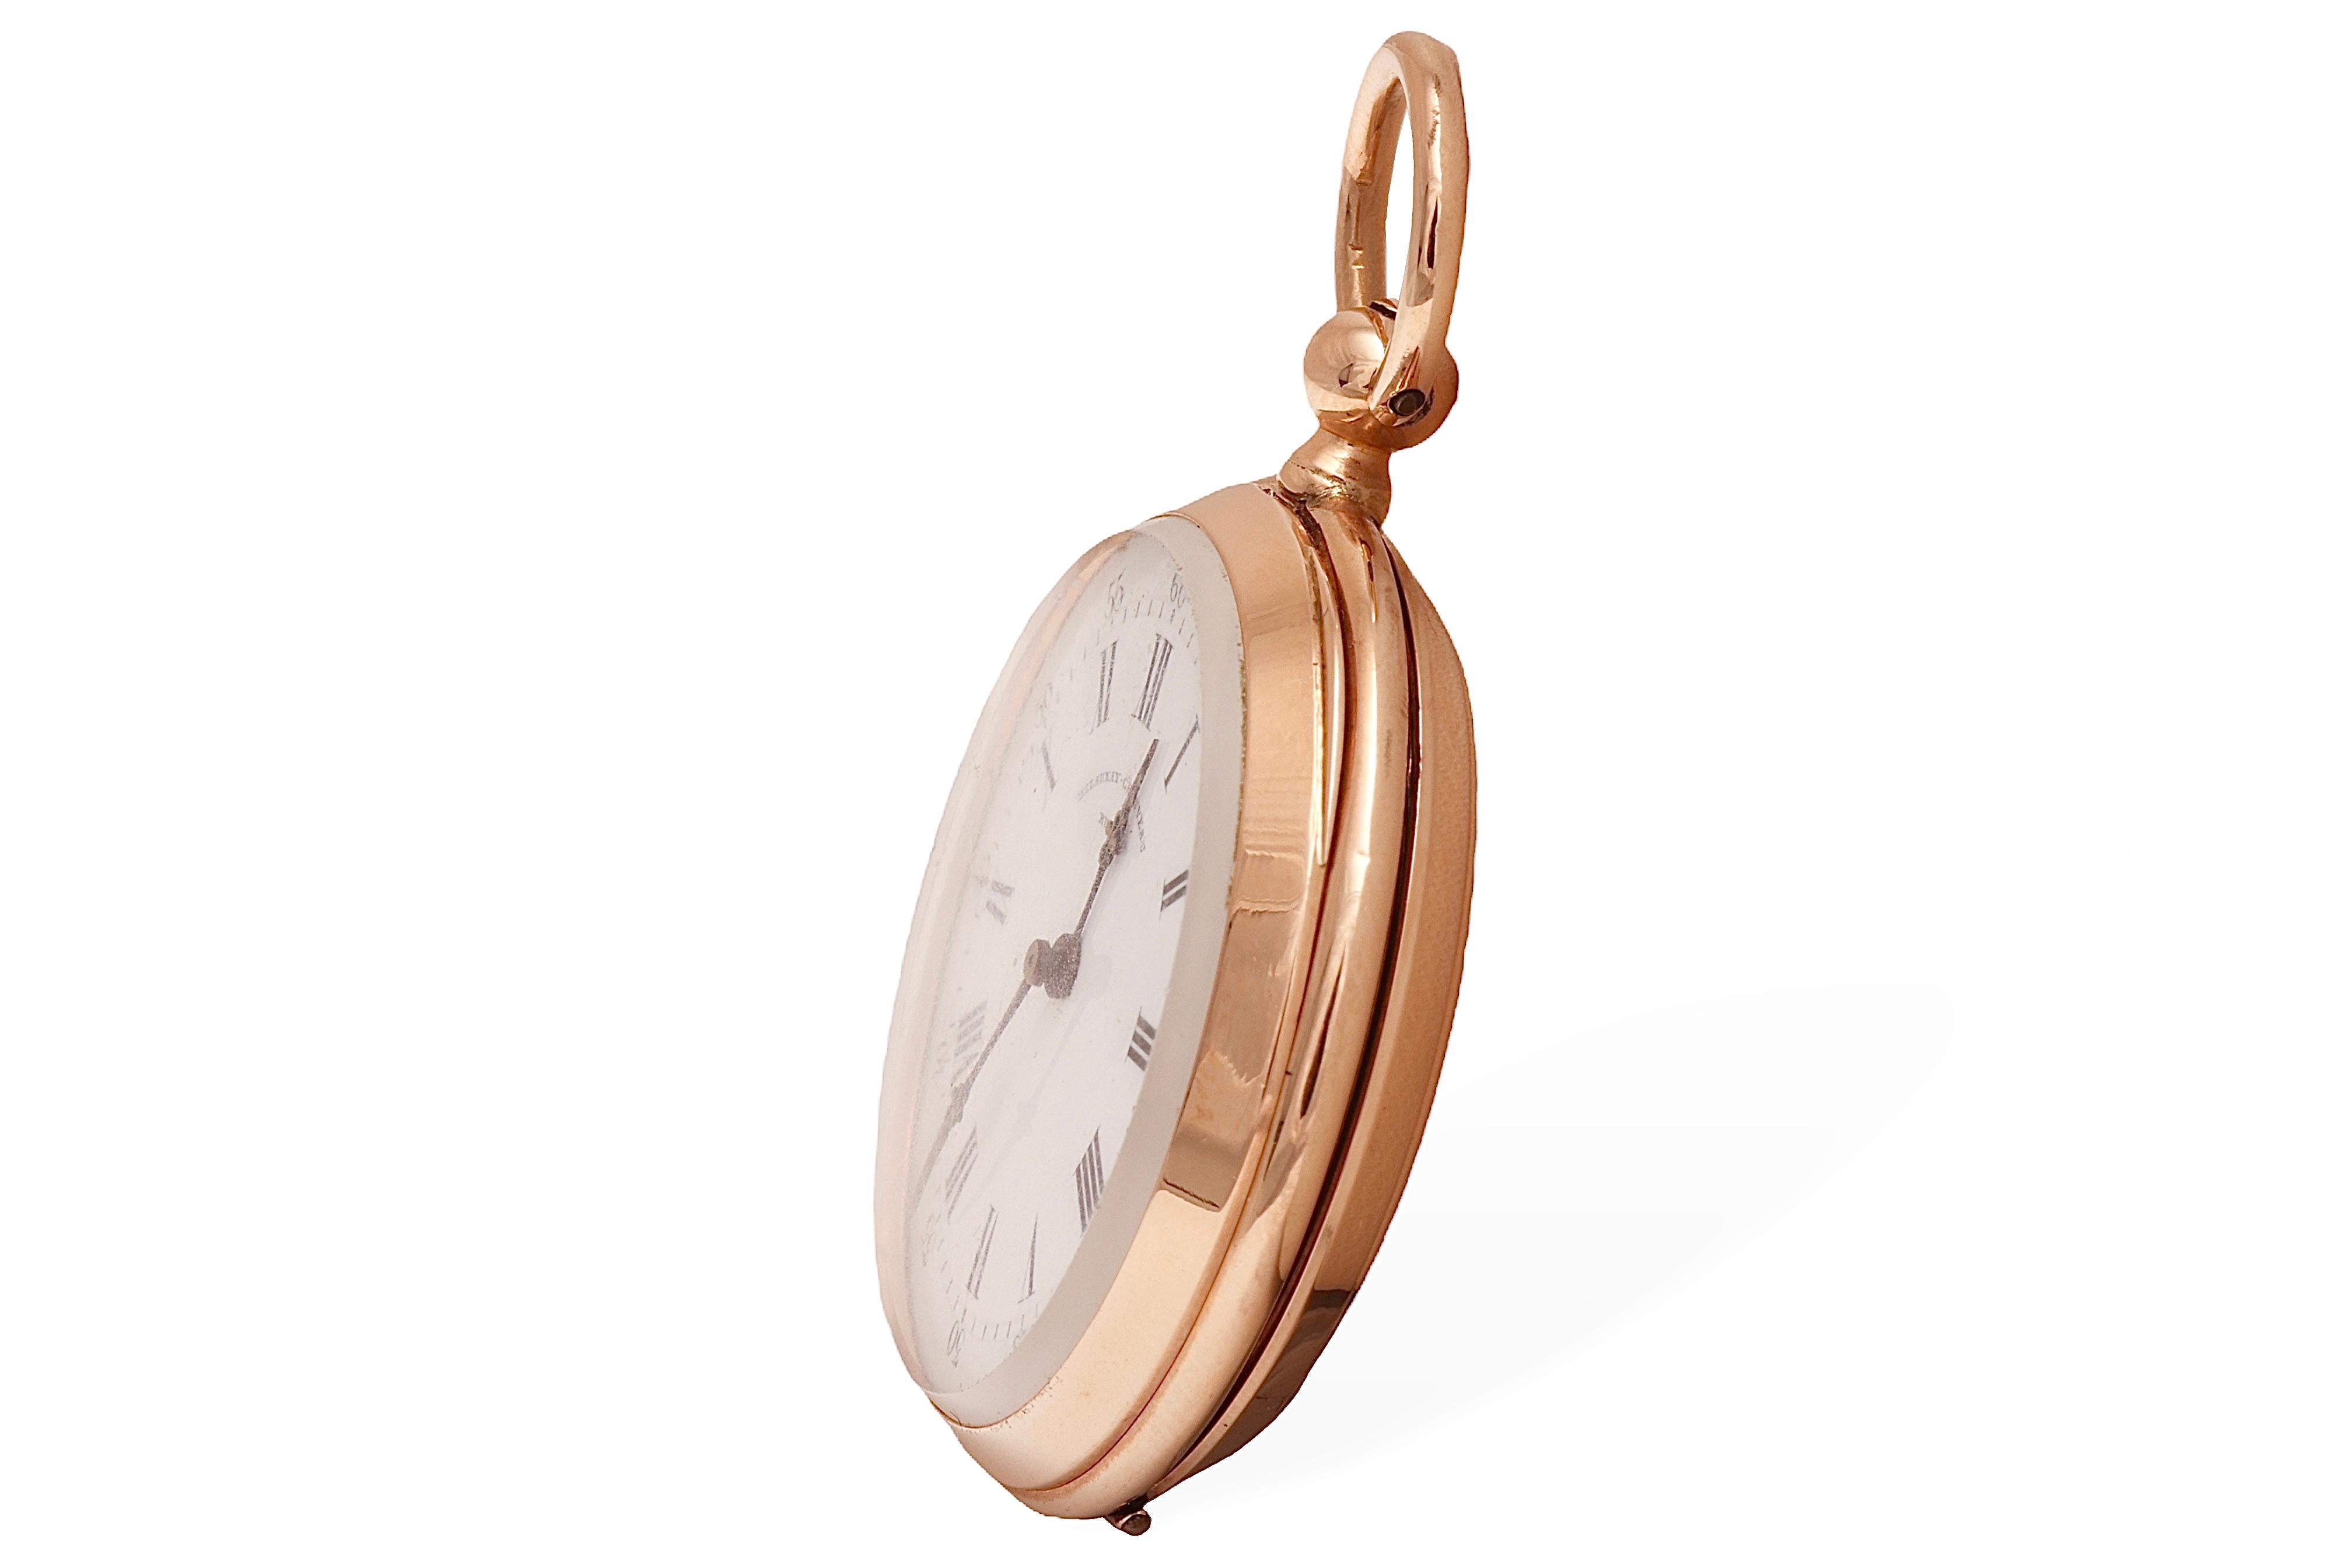 Artisan 14 Kt Solid Pink Gold Delaunay Chauveau Ruffec pocket watch For Sale